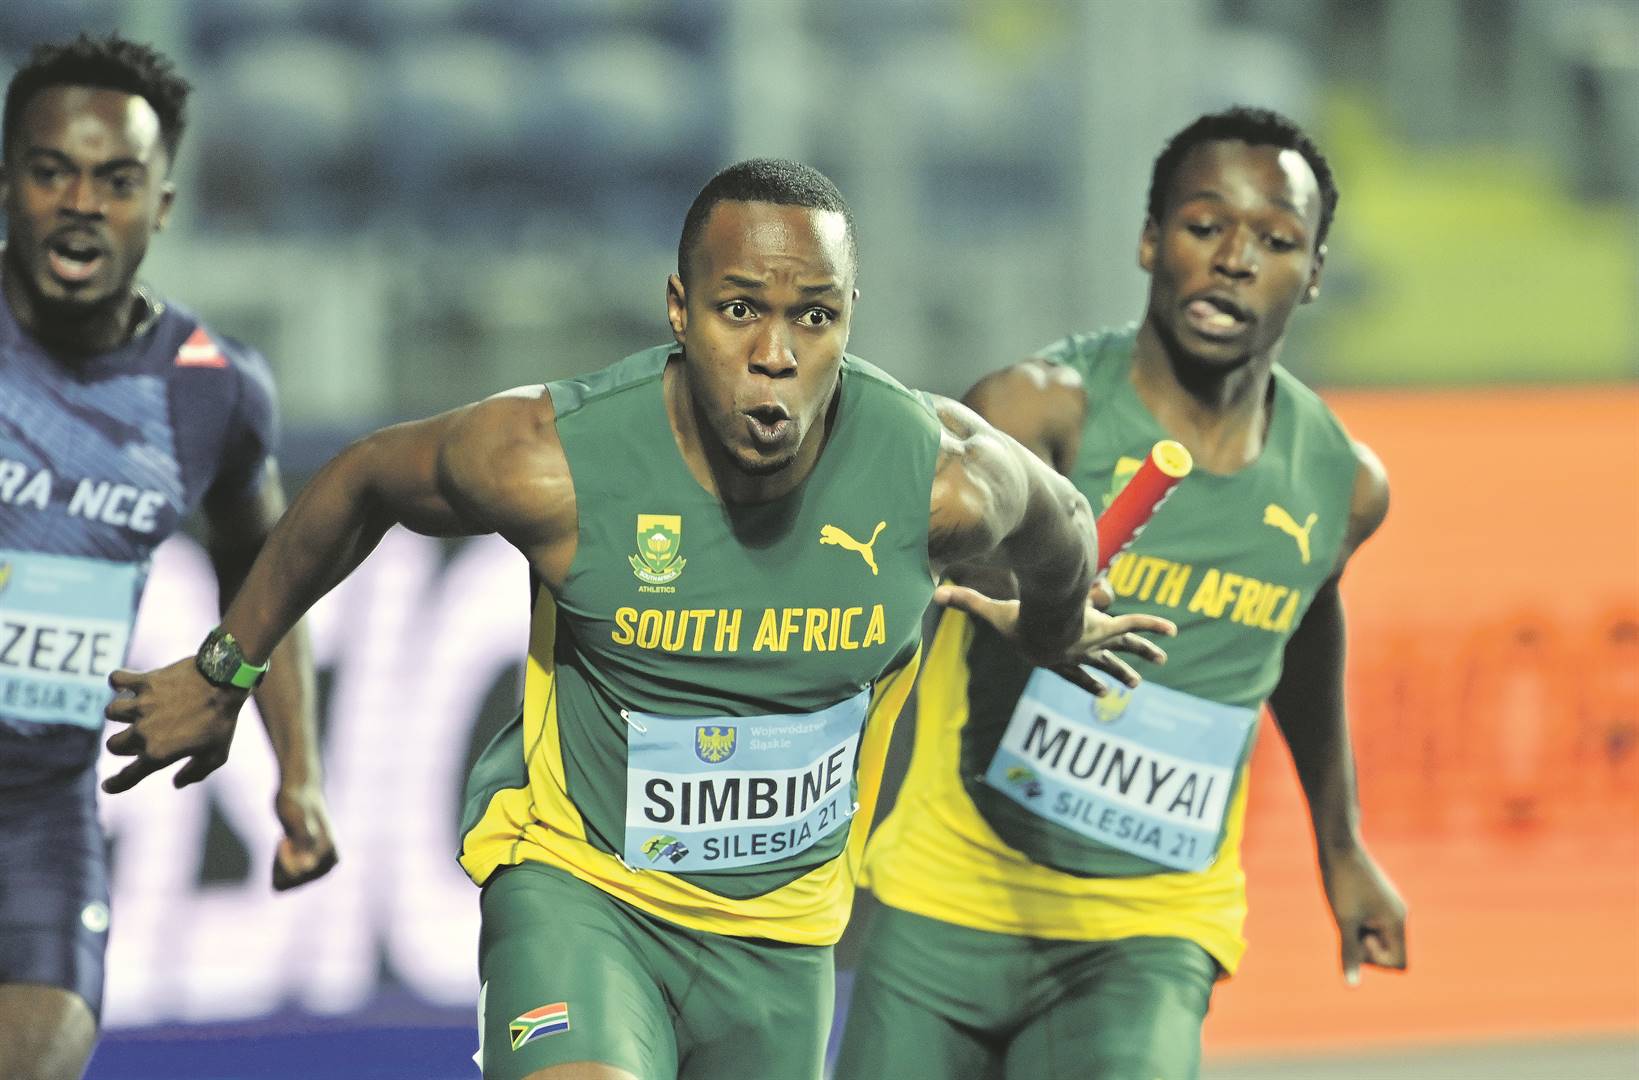 Akani Simbine and Clarence Munyai have teamed up again in Team SA’s 4x100m relay squad.